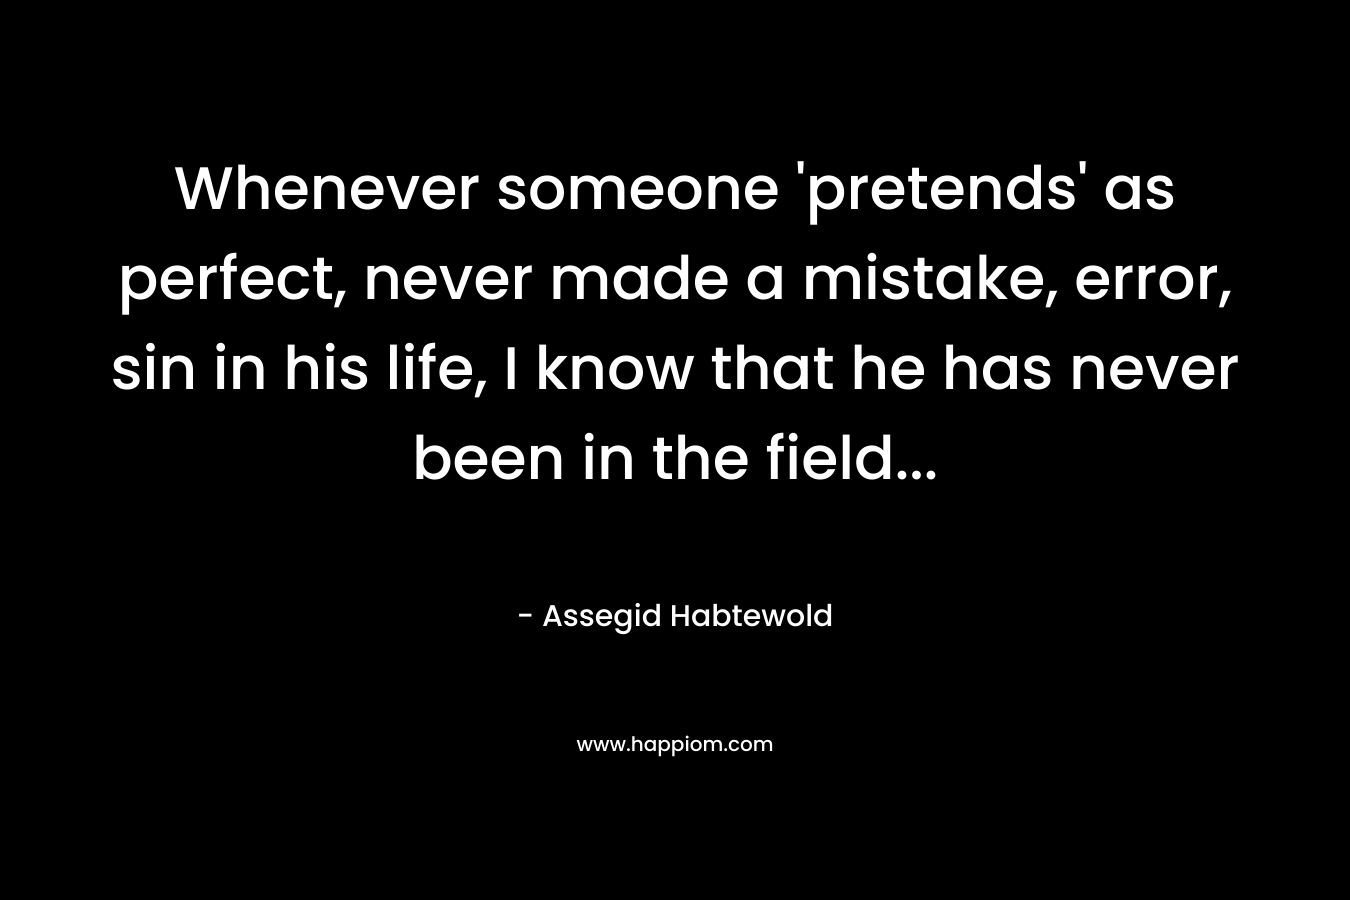 Whenever someone ‘pretends’ as perfect, never made a mistake, error, sin in his life, I know that he has never been in the field… – Assegid Habtewold